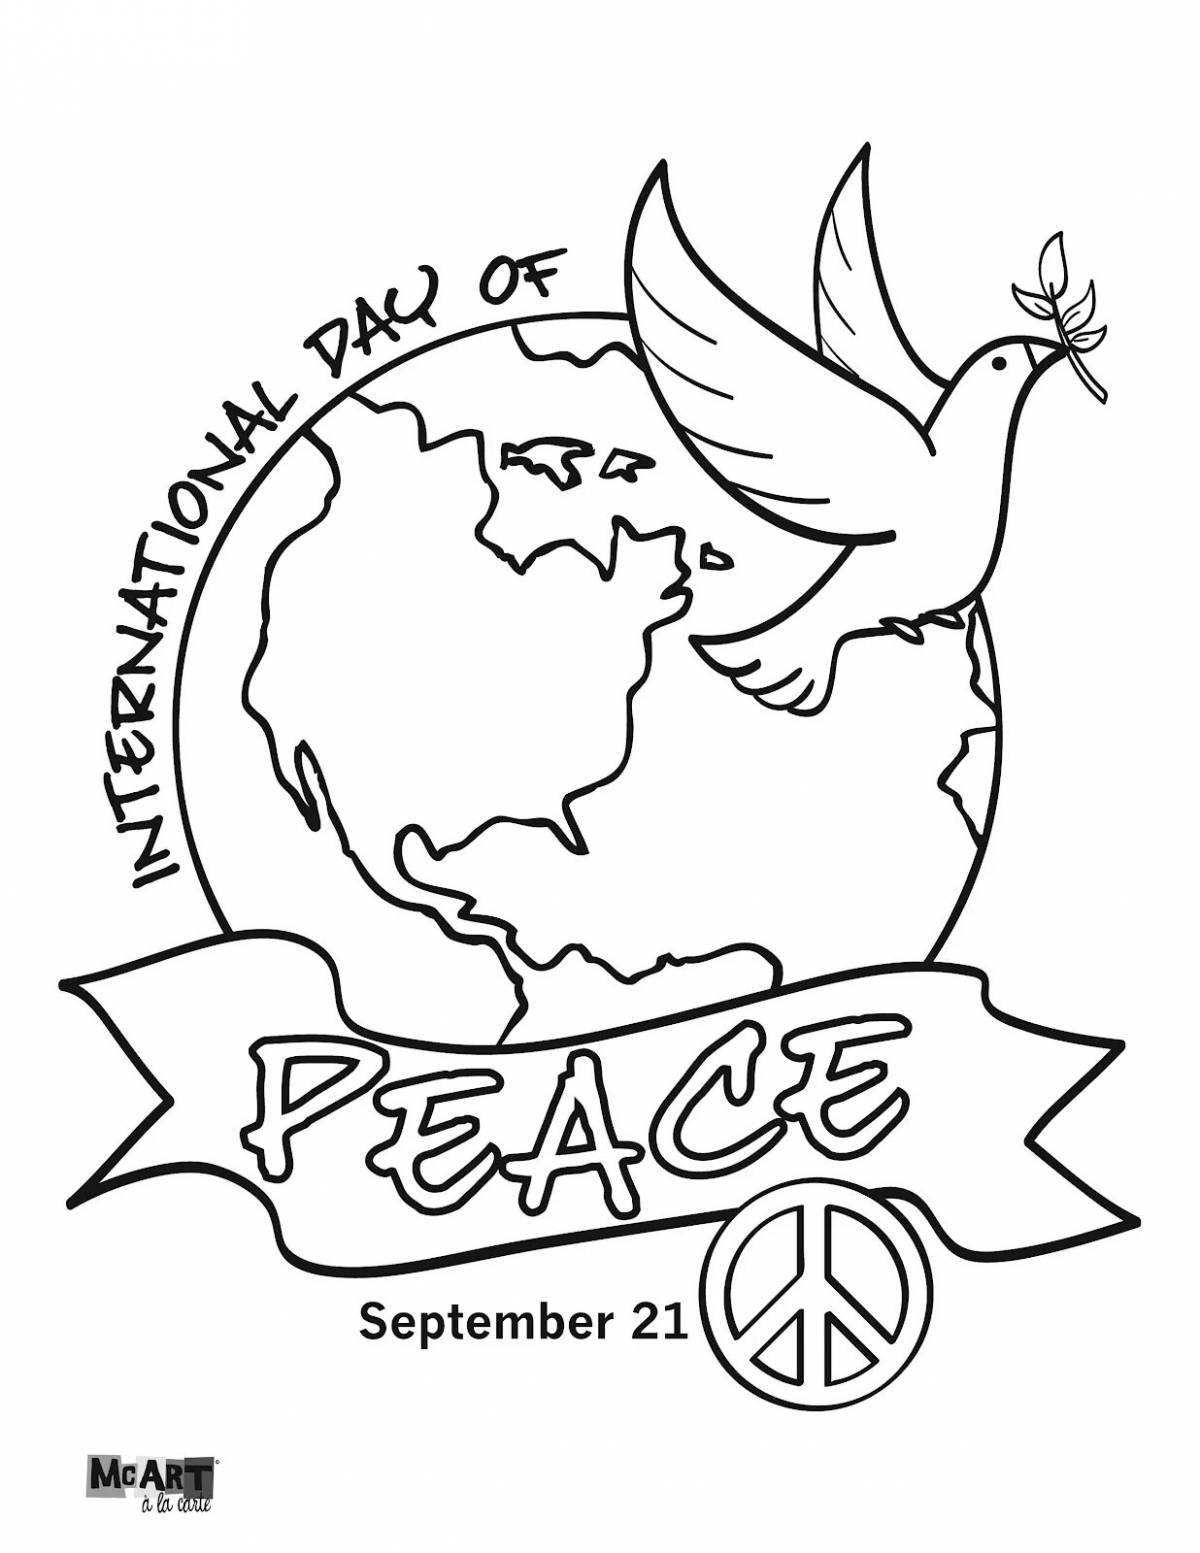 Exciting no war coloring book for babies